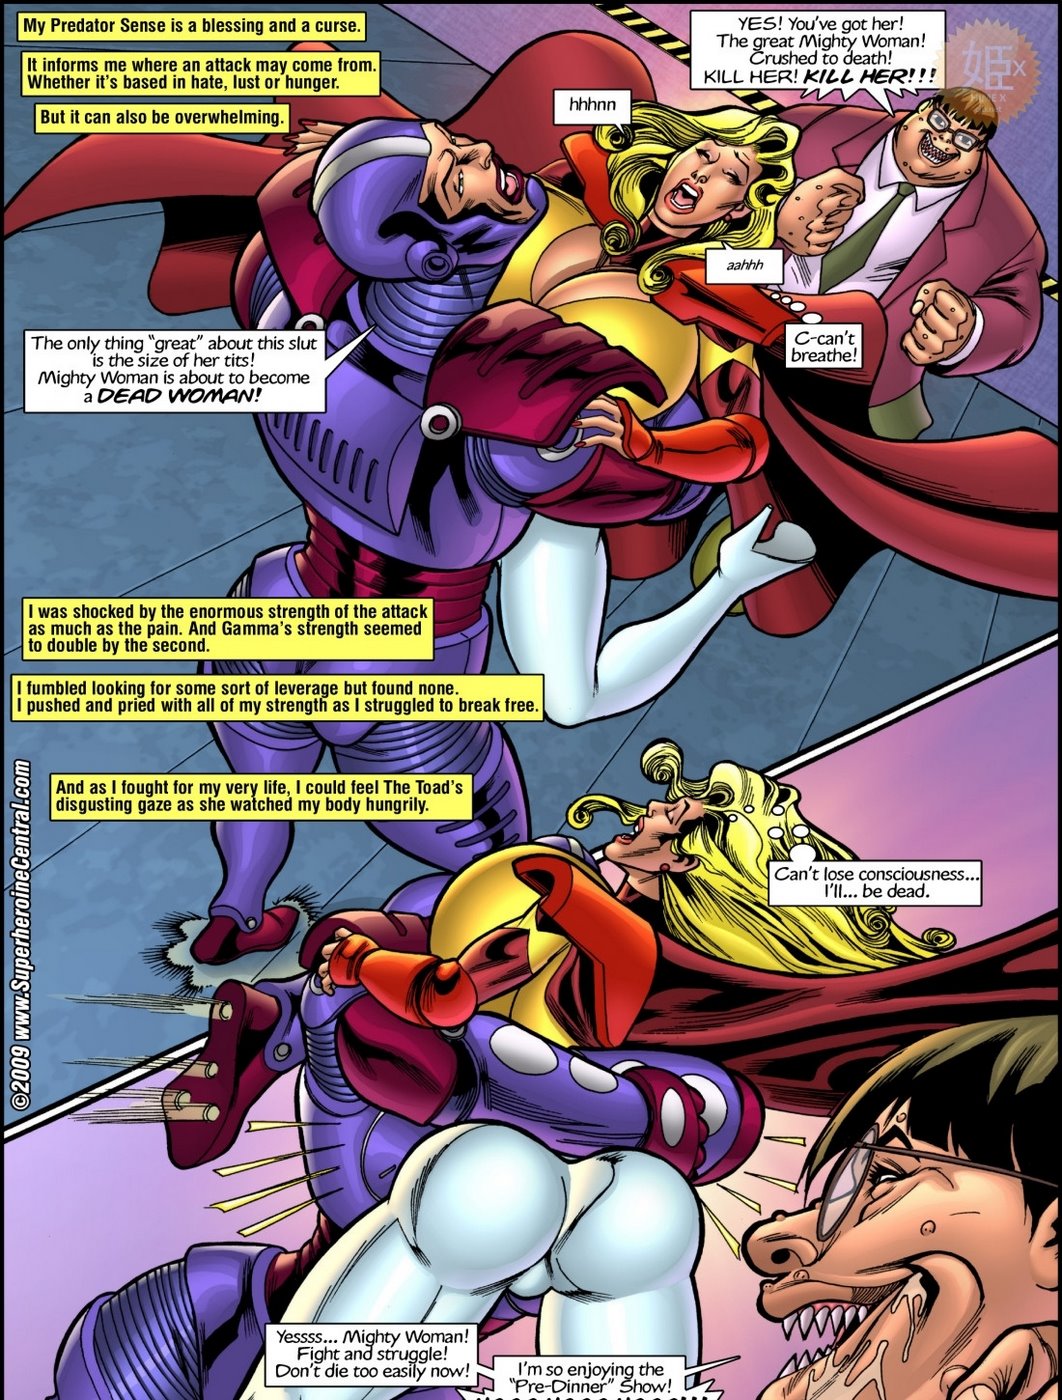 Superheroine Central- Mighty cow - part 2